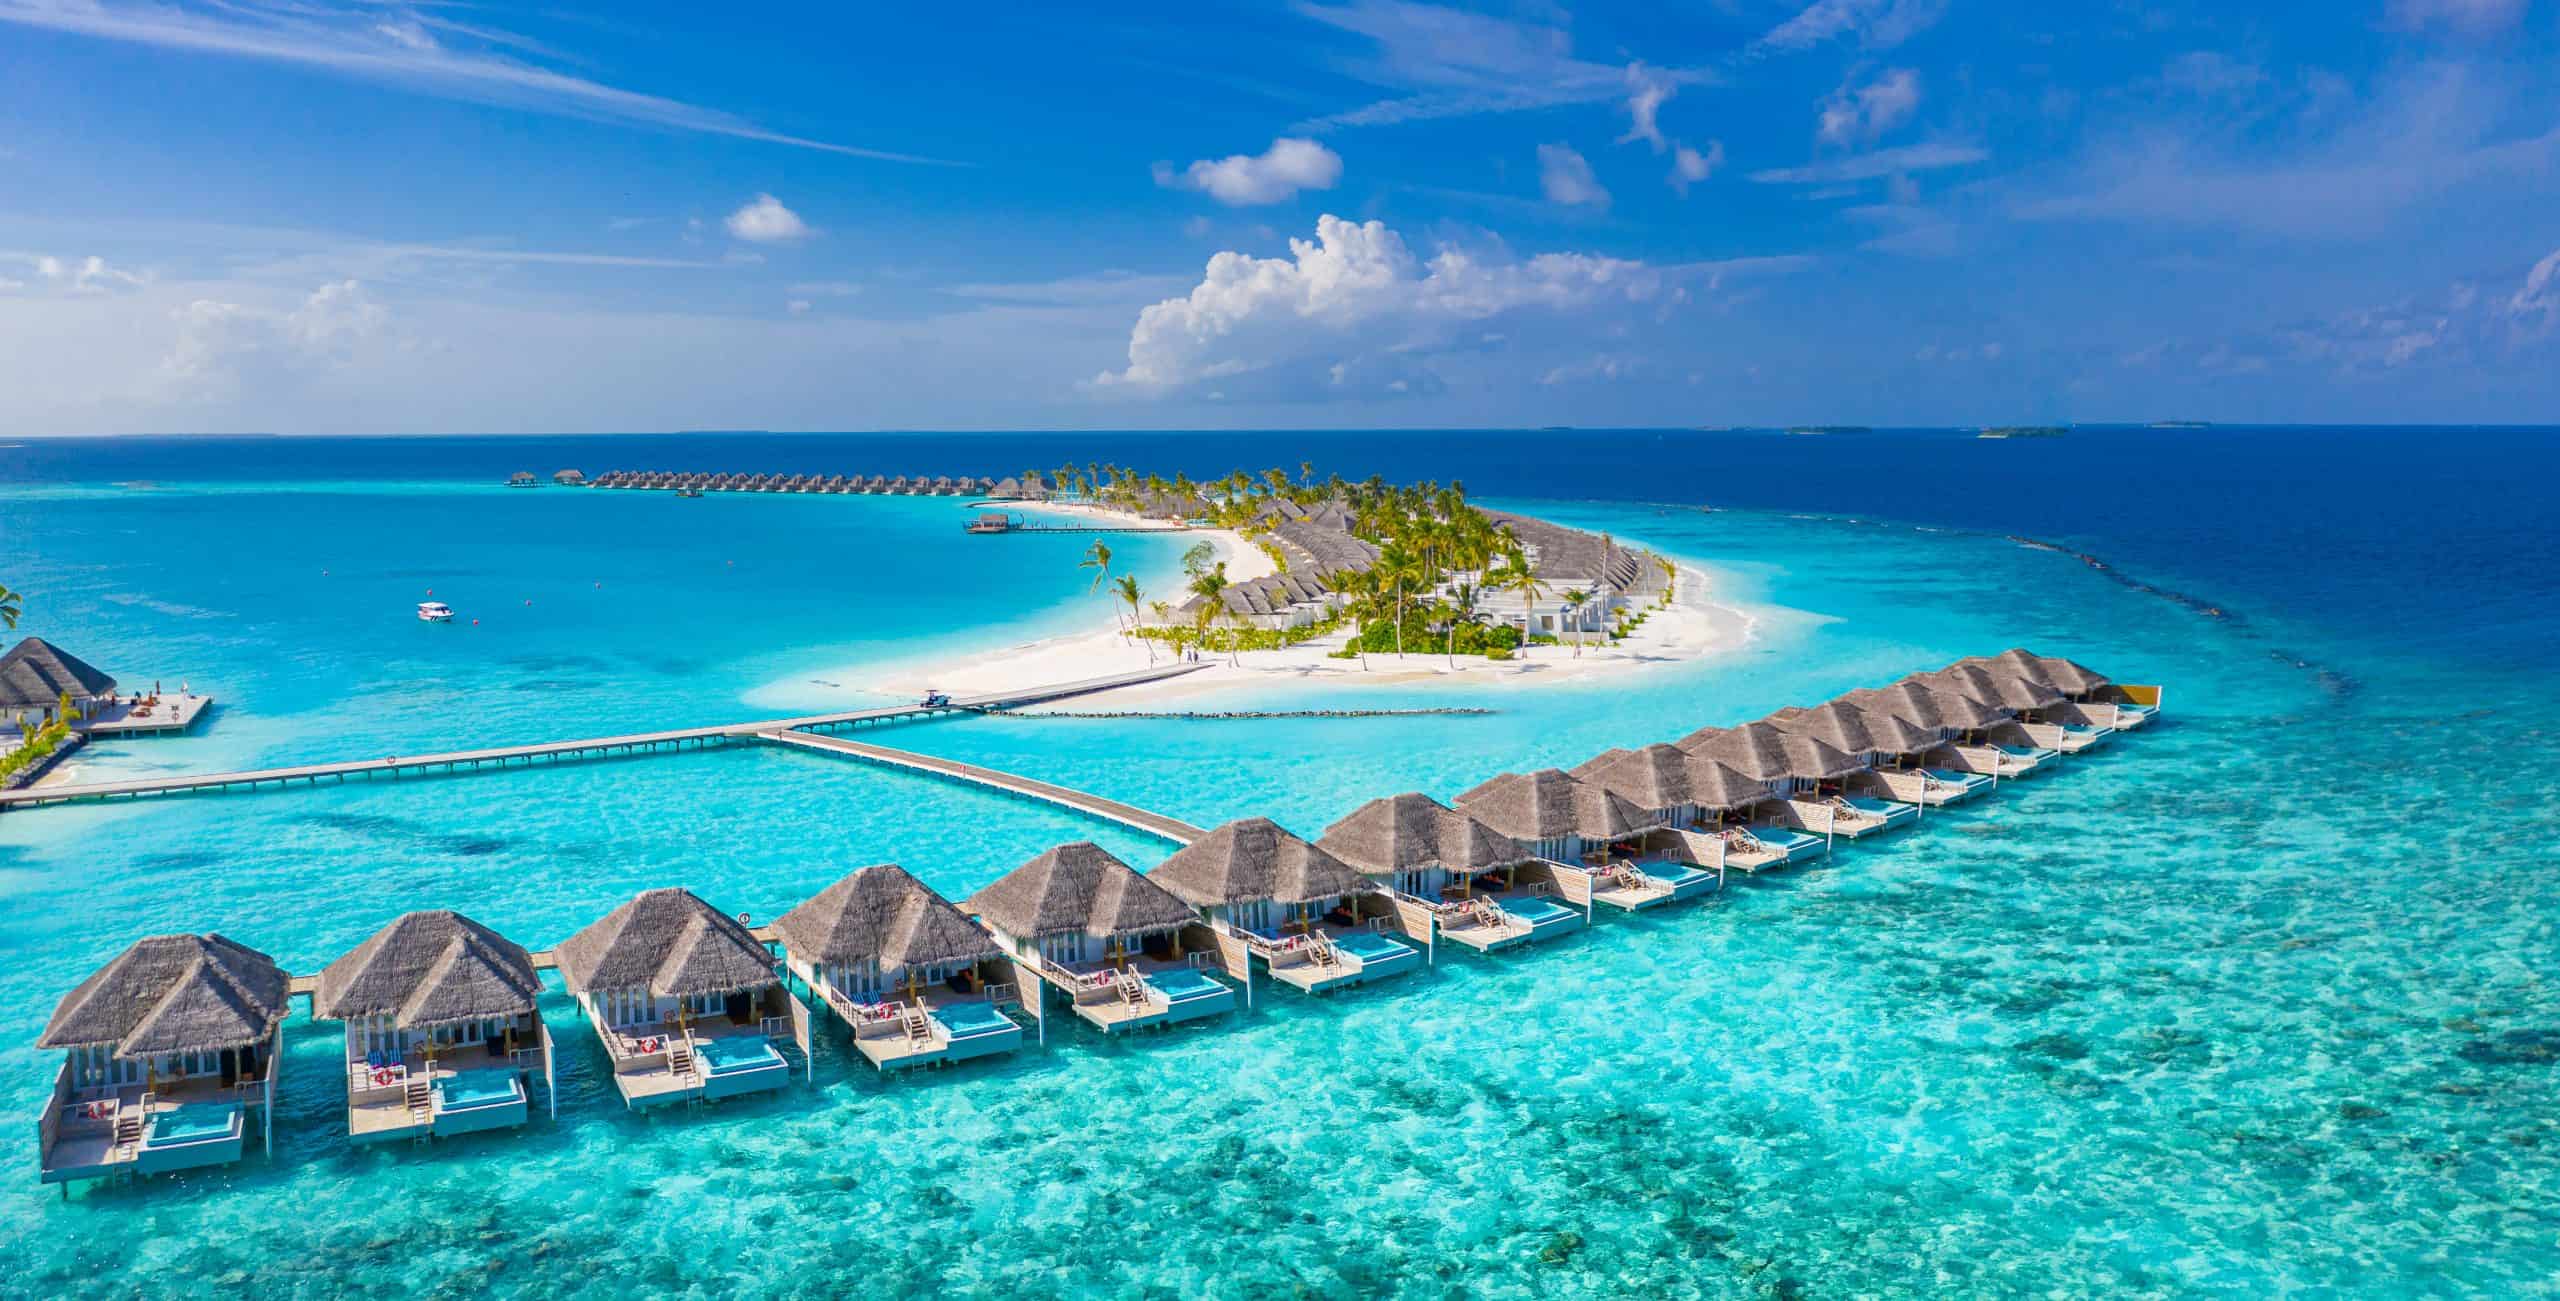 <ul> <li><strong>Where:</strong> Dhaalu Atoll, Maldives</li> </ul> <p>Another fabulous all-inclusive resort in the Maldives is Sun Siyam Iru Veli. This is the type of resort to visit if you're ready to <em>completely</em> unwind from the hustle and bustle of your daily routine. Tennis, snorkeling, badminton, and windsurfing are just a few of the enticing activities guests can try at Sun Siyam Iru Veli.</p> <p>The full-service spa located on property is probably the best draw of all. It's calming and pristine with every opportunity to leave guests feeling completely relaxed from head to toe. As far as food and drinks go, the wine and champagne you'll taste at Sun Siyam Iru Veli is top of line.</p>